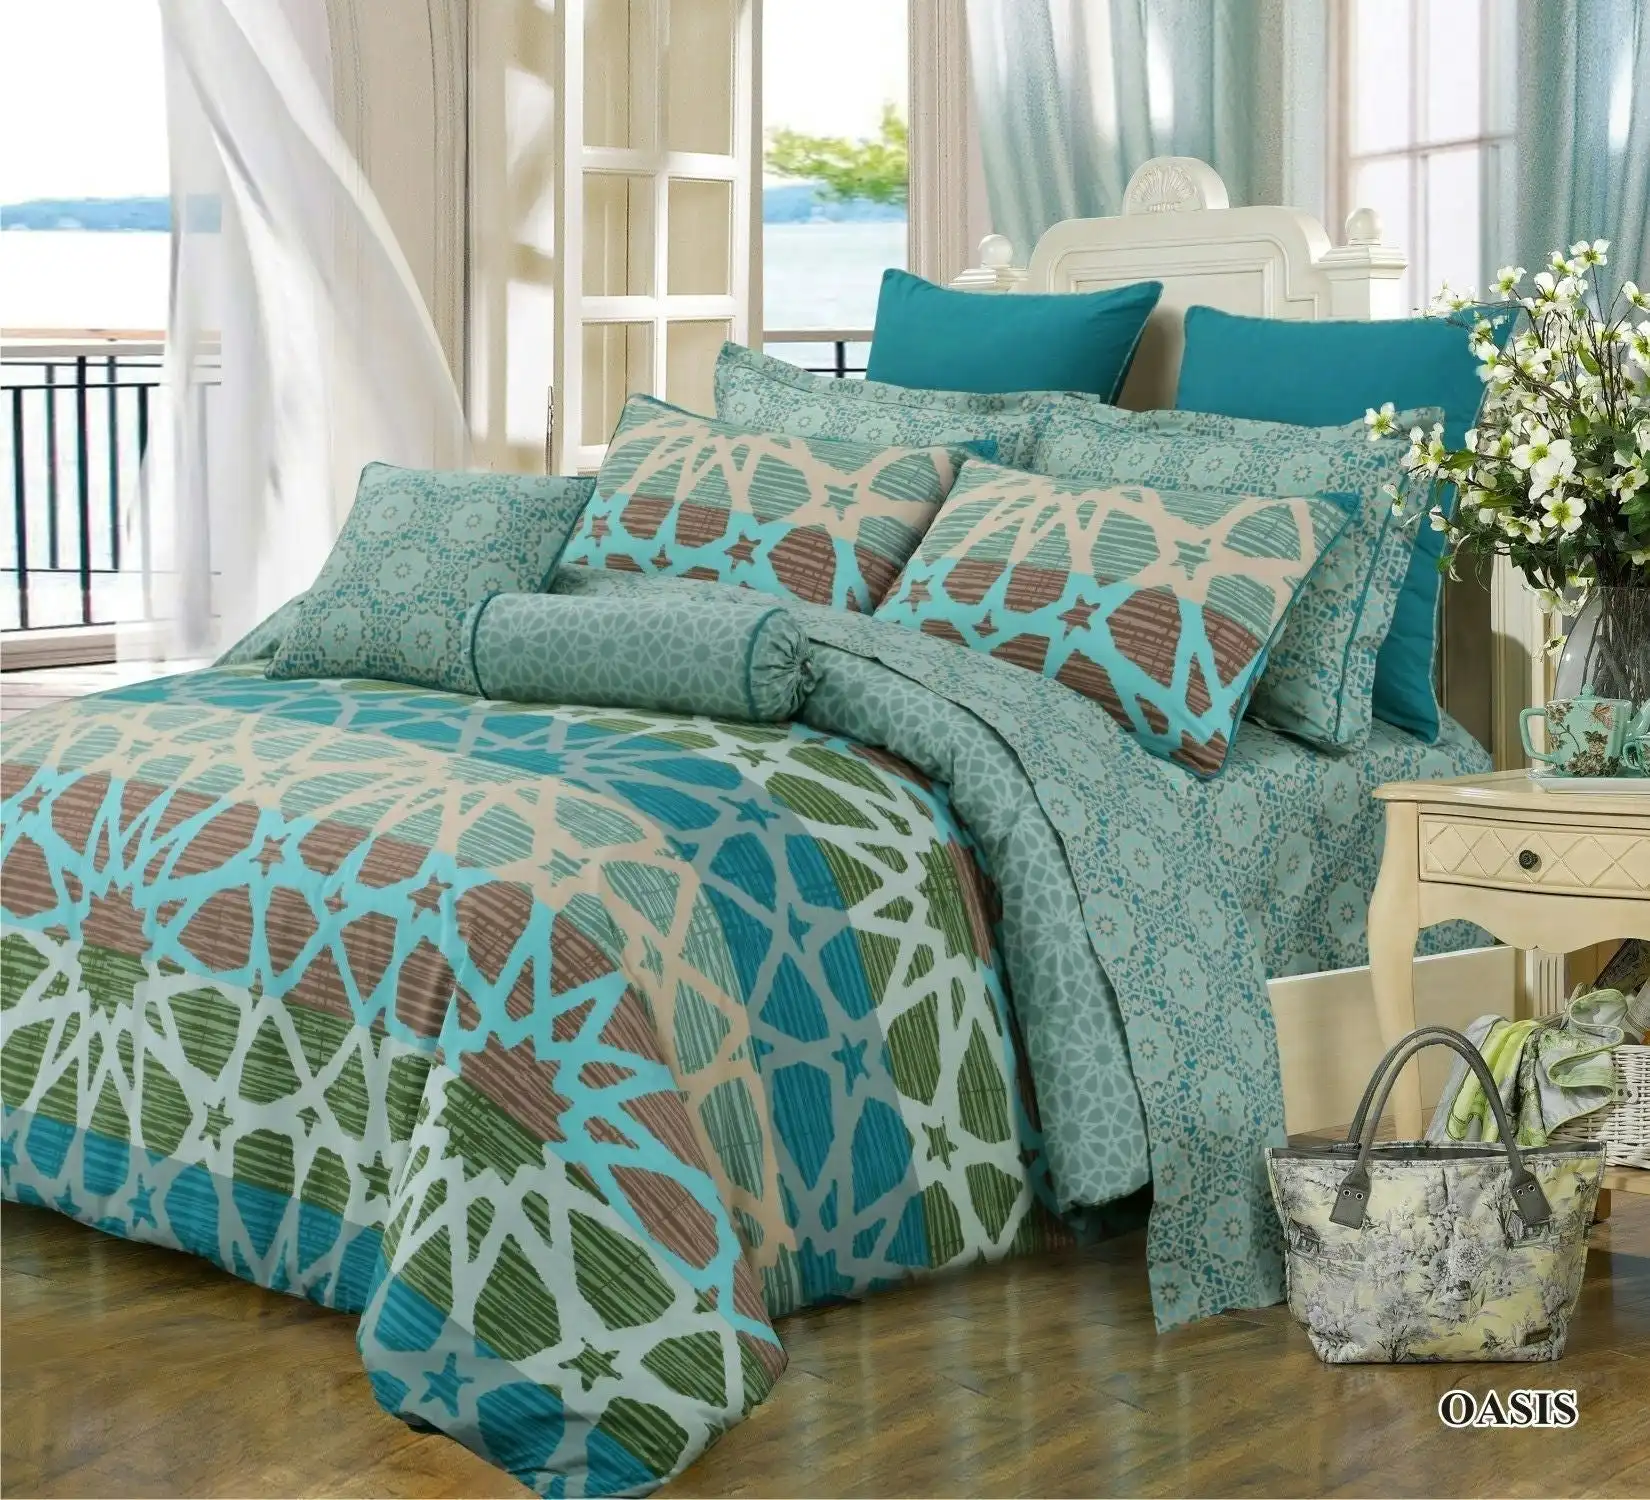 Oasis Quilt Cover Set With Extra Standard Pillowcases